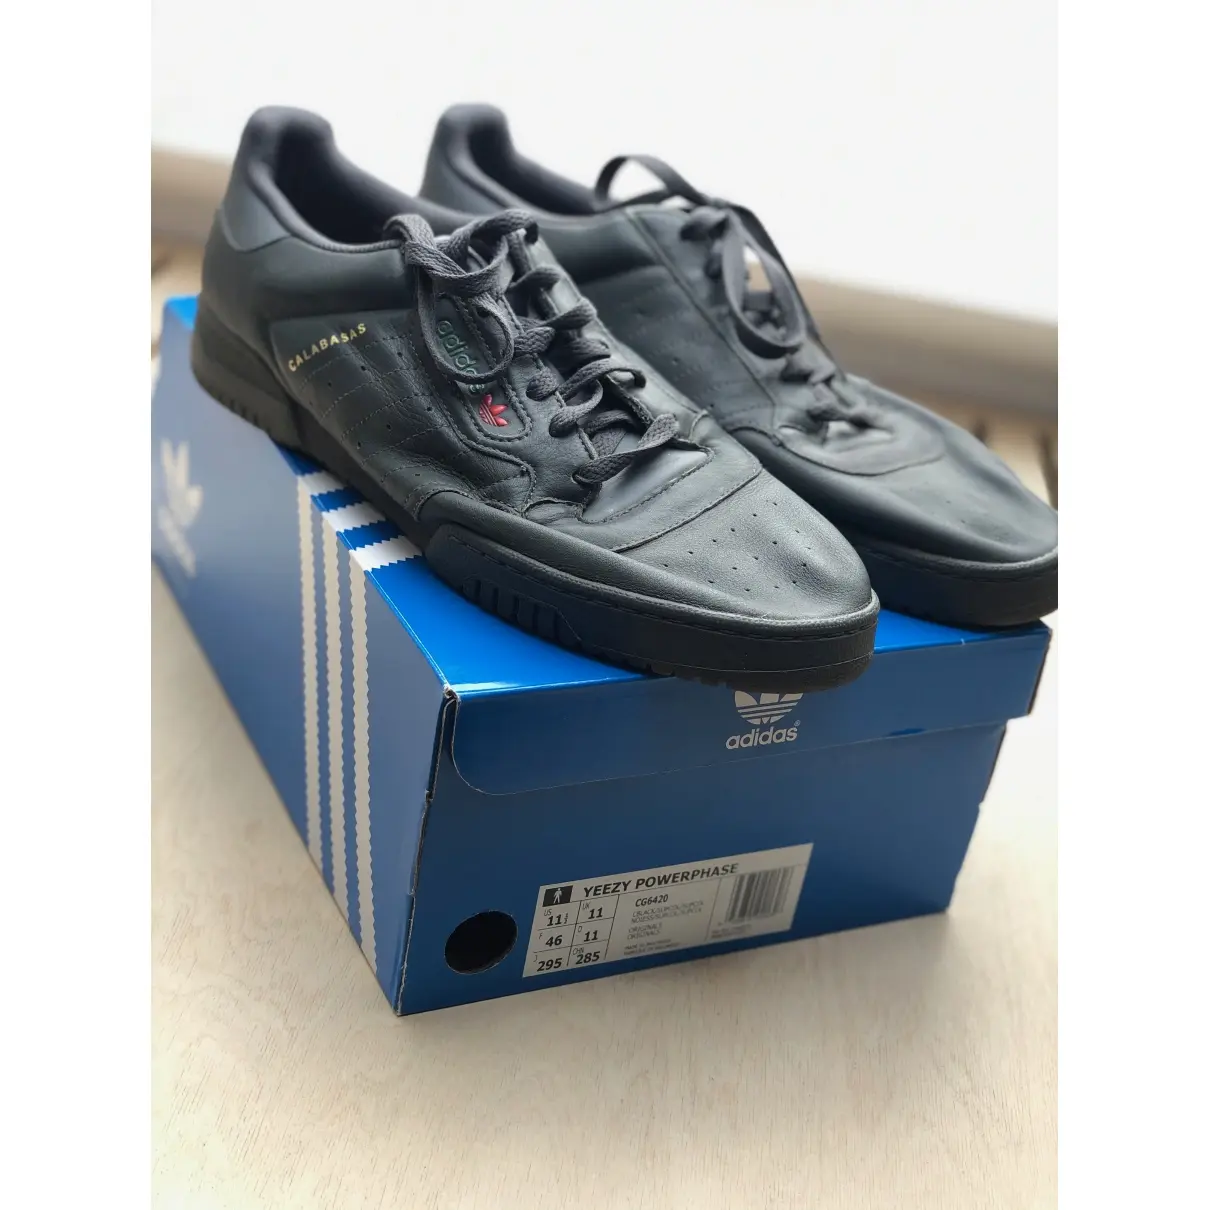 Yeezy x Adidas POWERPHASE leather low trainers for sale